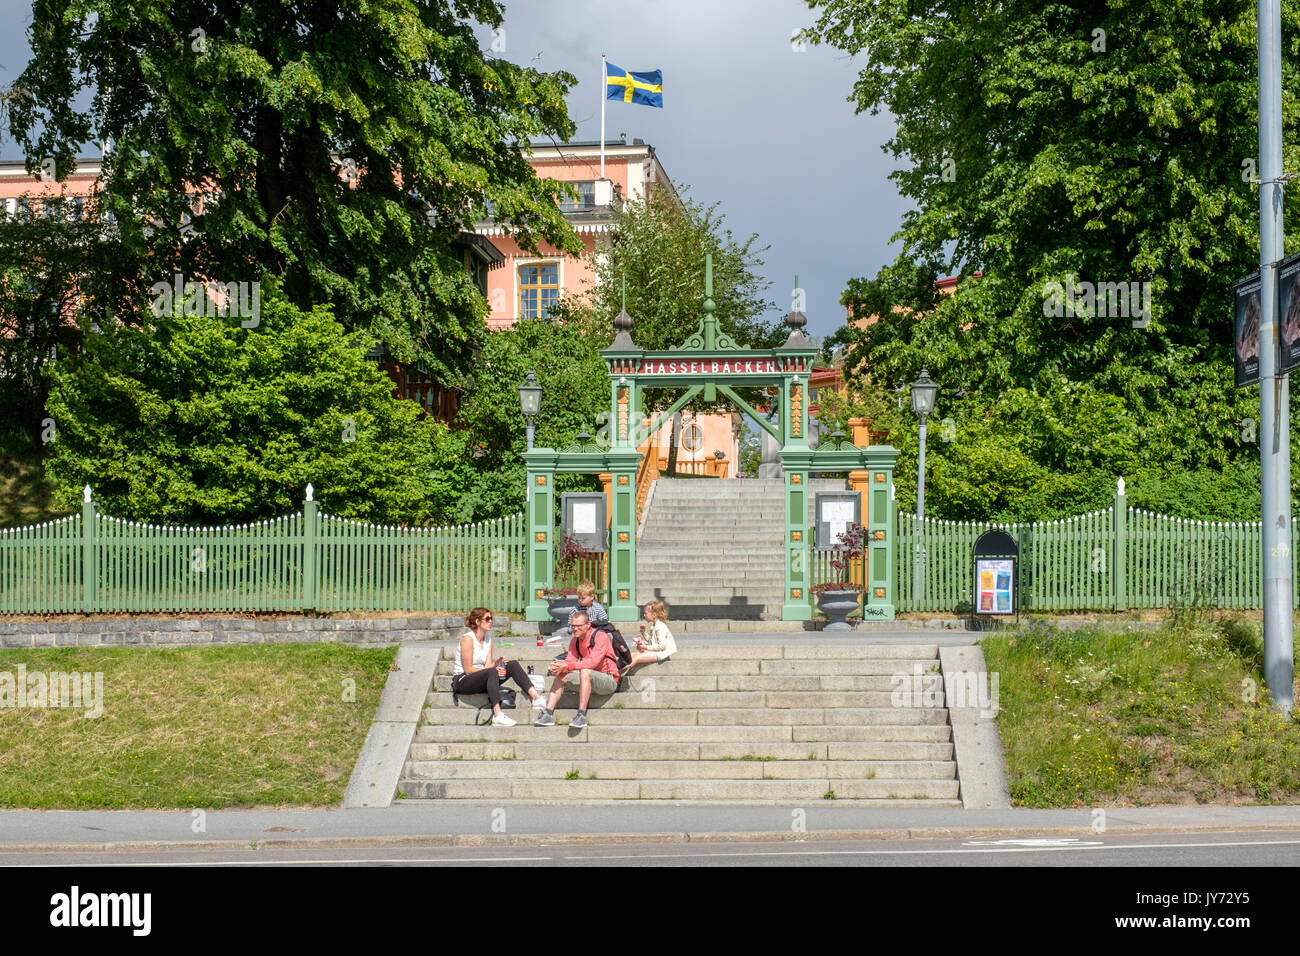 Hasselbacken at Djurgarden  in Stockholm. Djurgarden is a recreational area with historical buildings, monuments, amusement park and open-air museum. Stock Photo